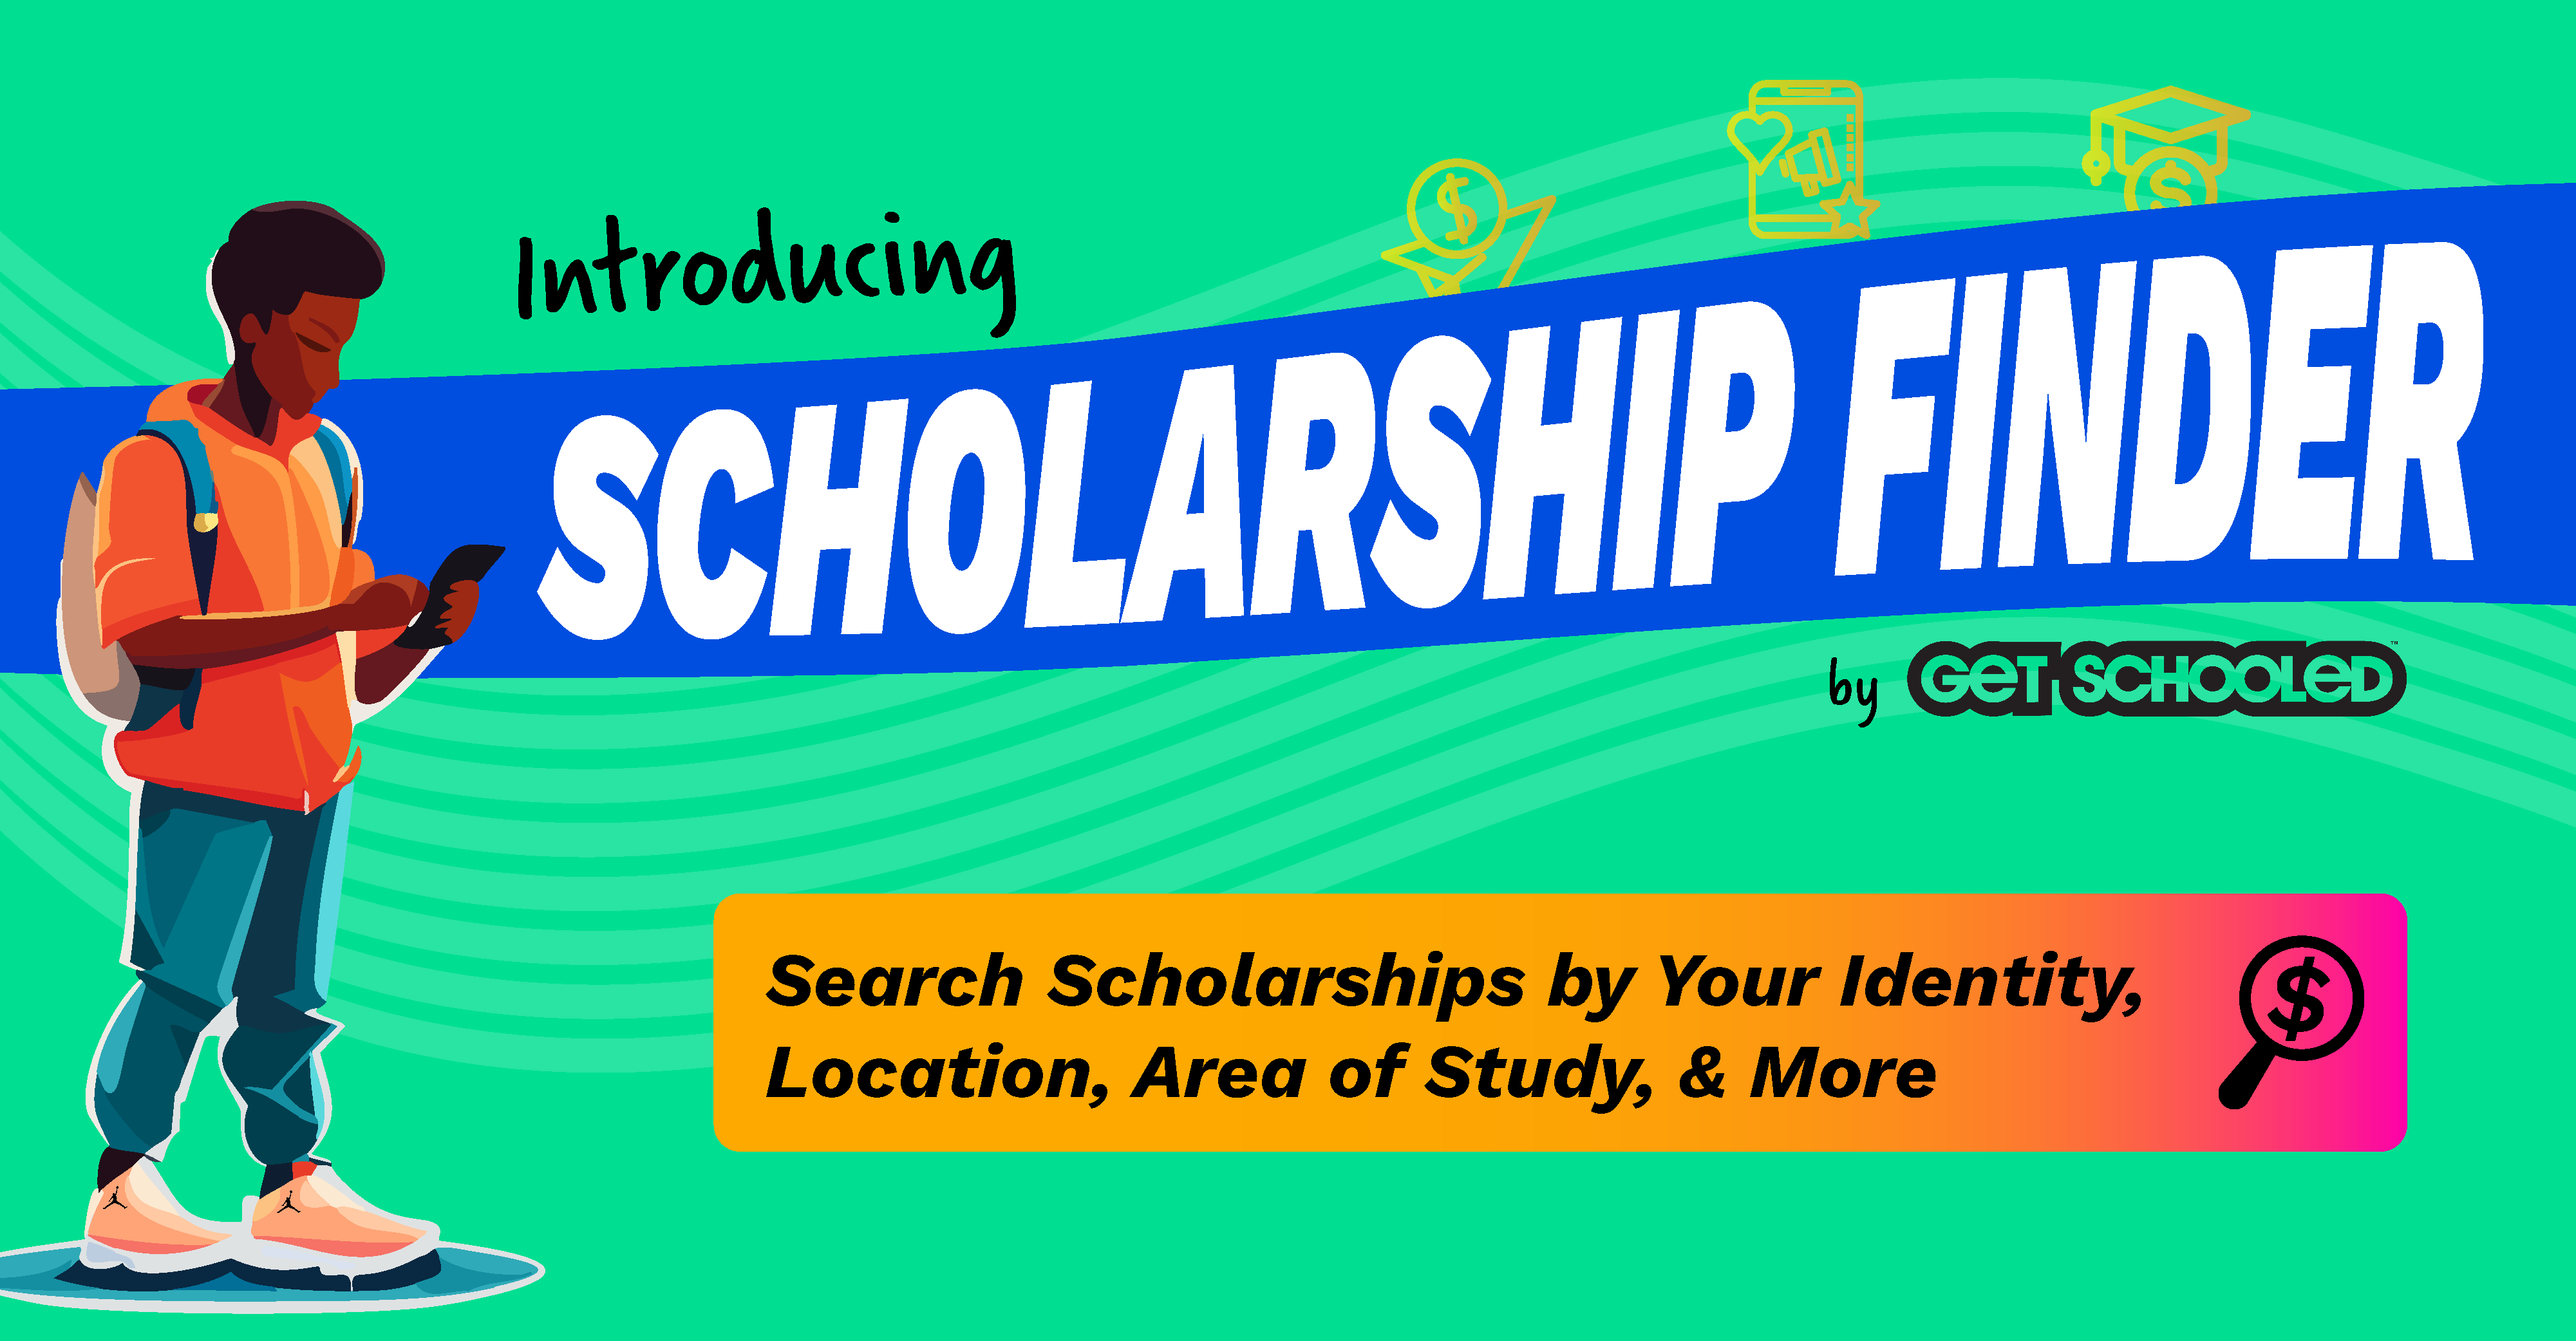 Illustration of a student (cartoon vector) with a backpack, gazing at their phone. The banner promotes the Get Schooled scholarship finder, stating, "Explore the Scholarship Finder by GET SCHOOLED: Discover Opportunities Based on Your Identity, Location, Area of Study, & More." - Scholarships For DACA Recipients & Undocumented Students